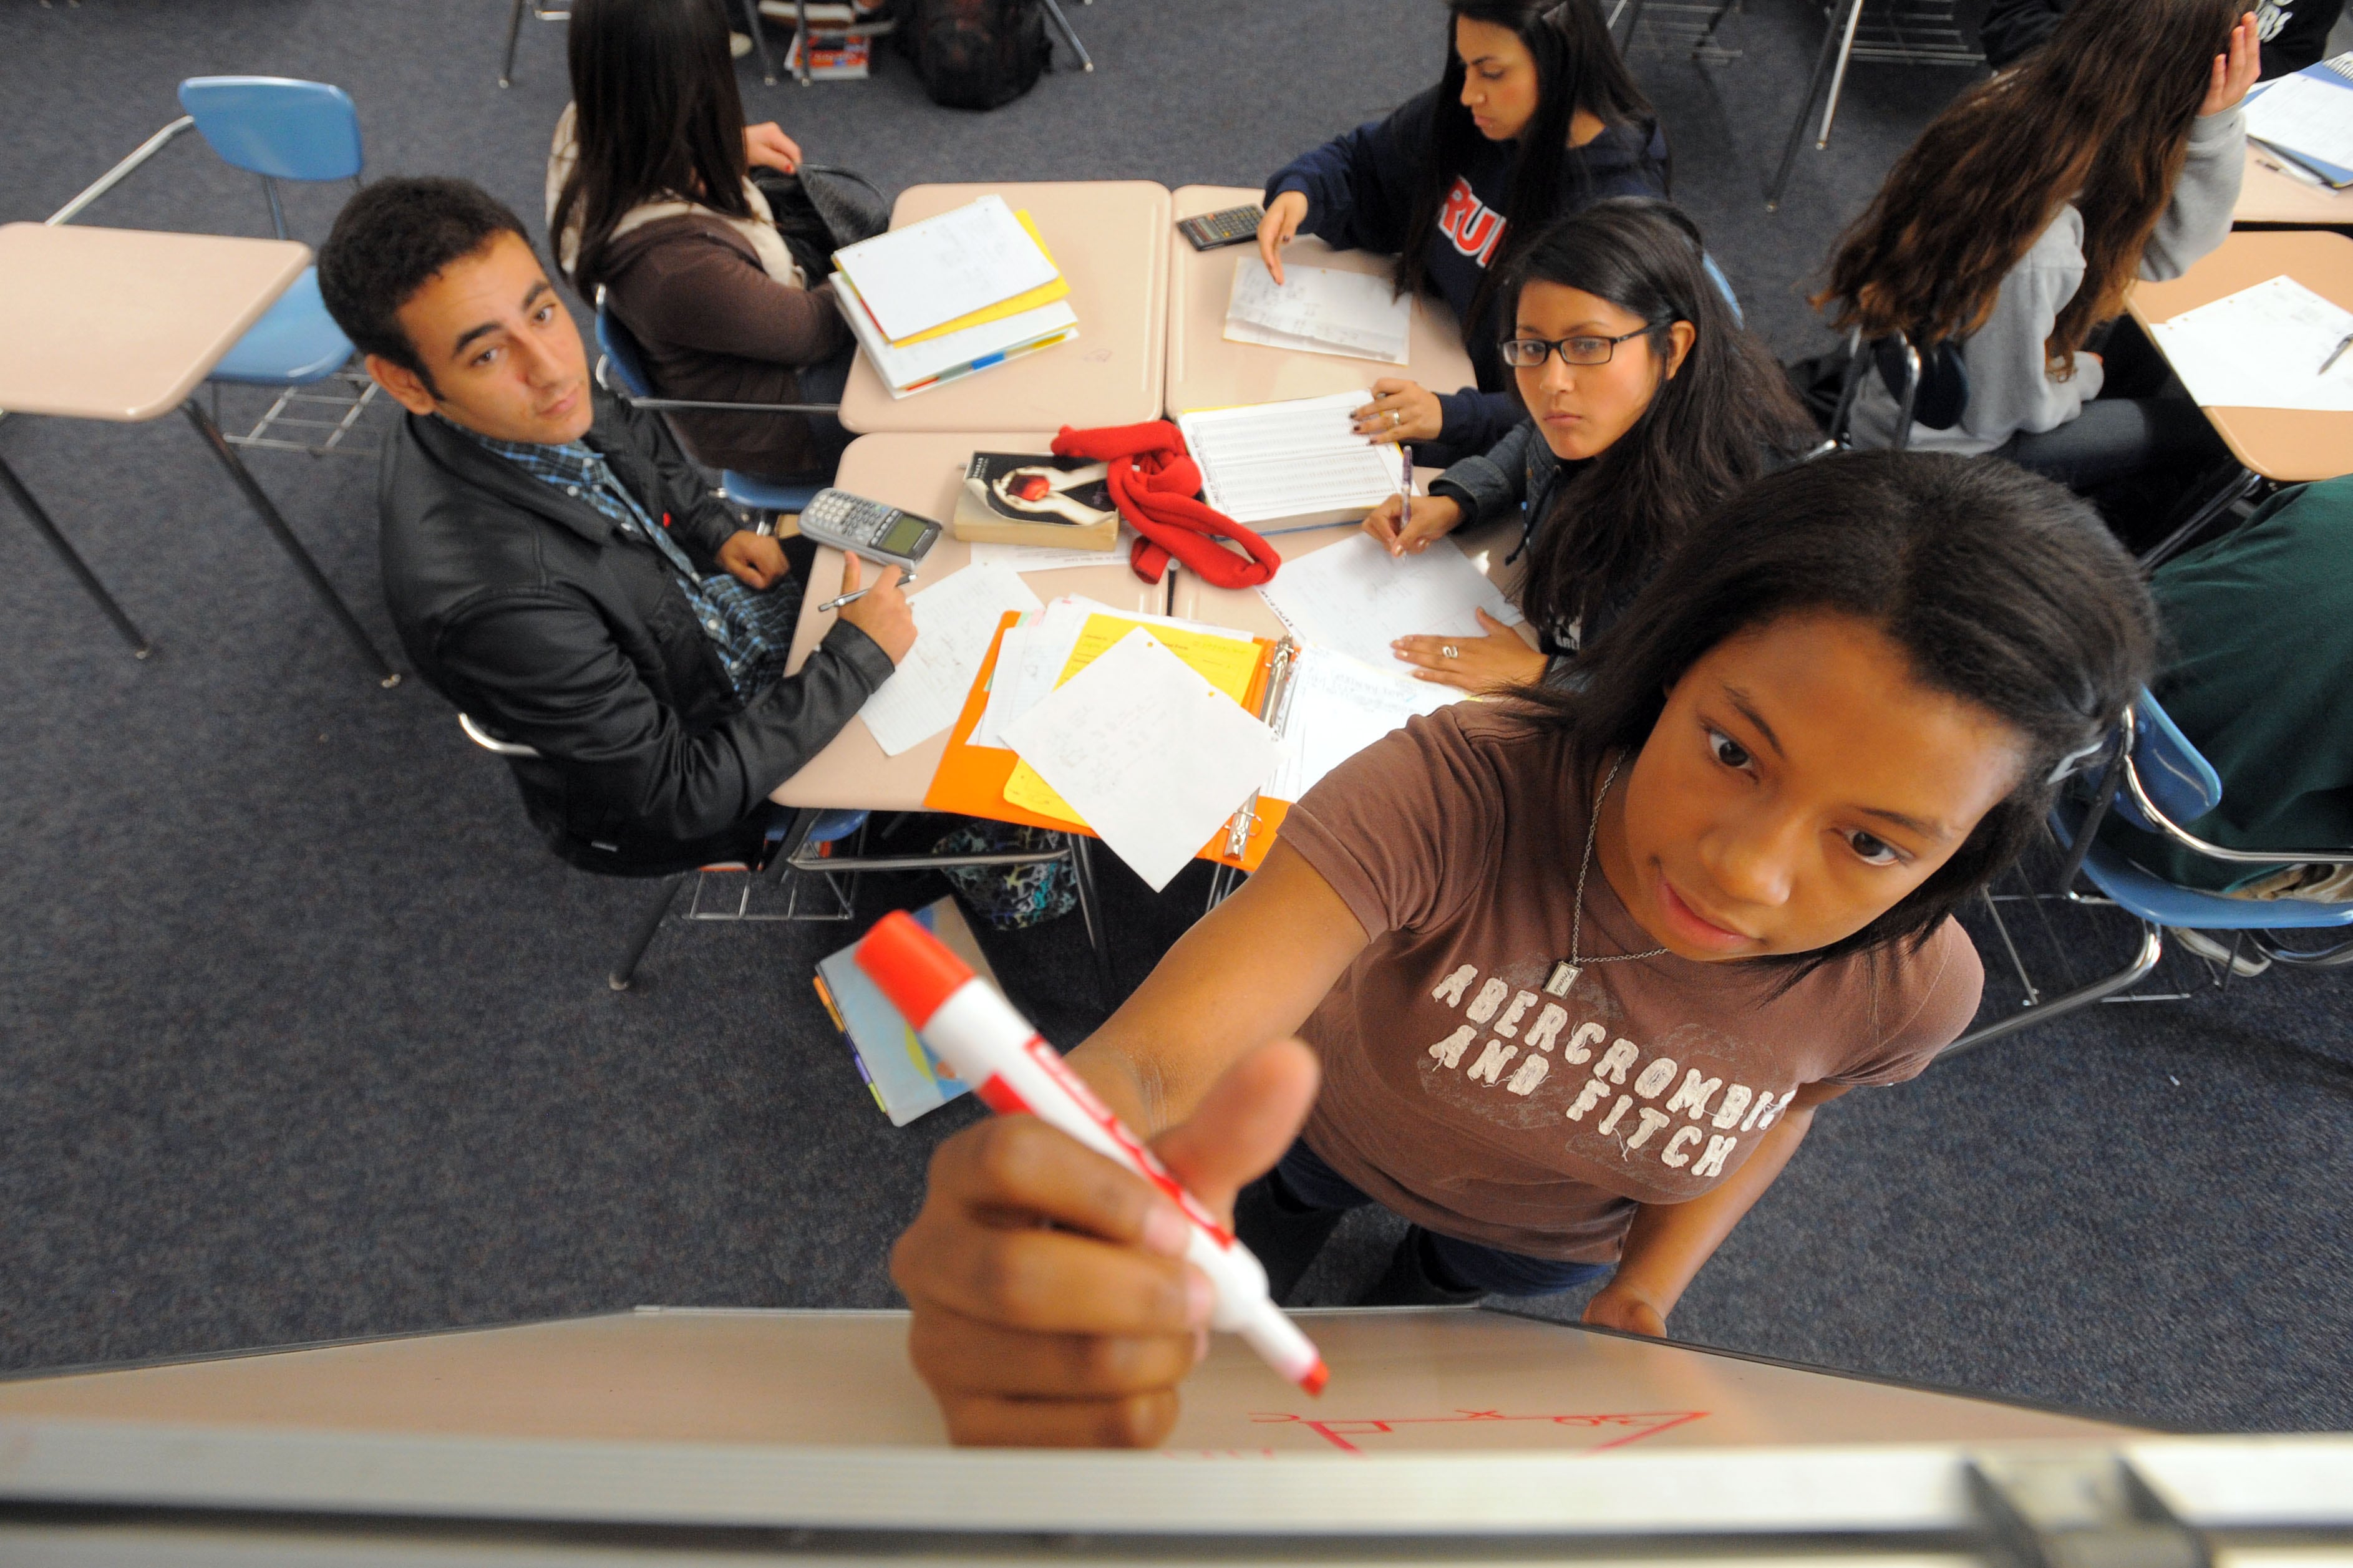 A teenage girl wearing a brown T-shirt holds a marker and writes a math problem on a whiteboard while her peers look on from a nearby desk.